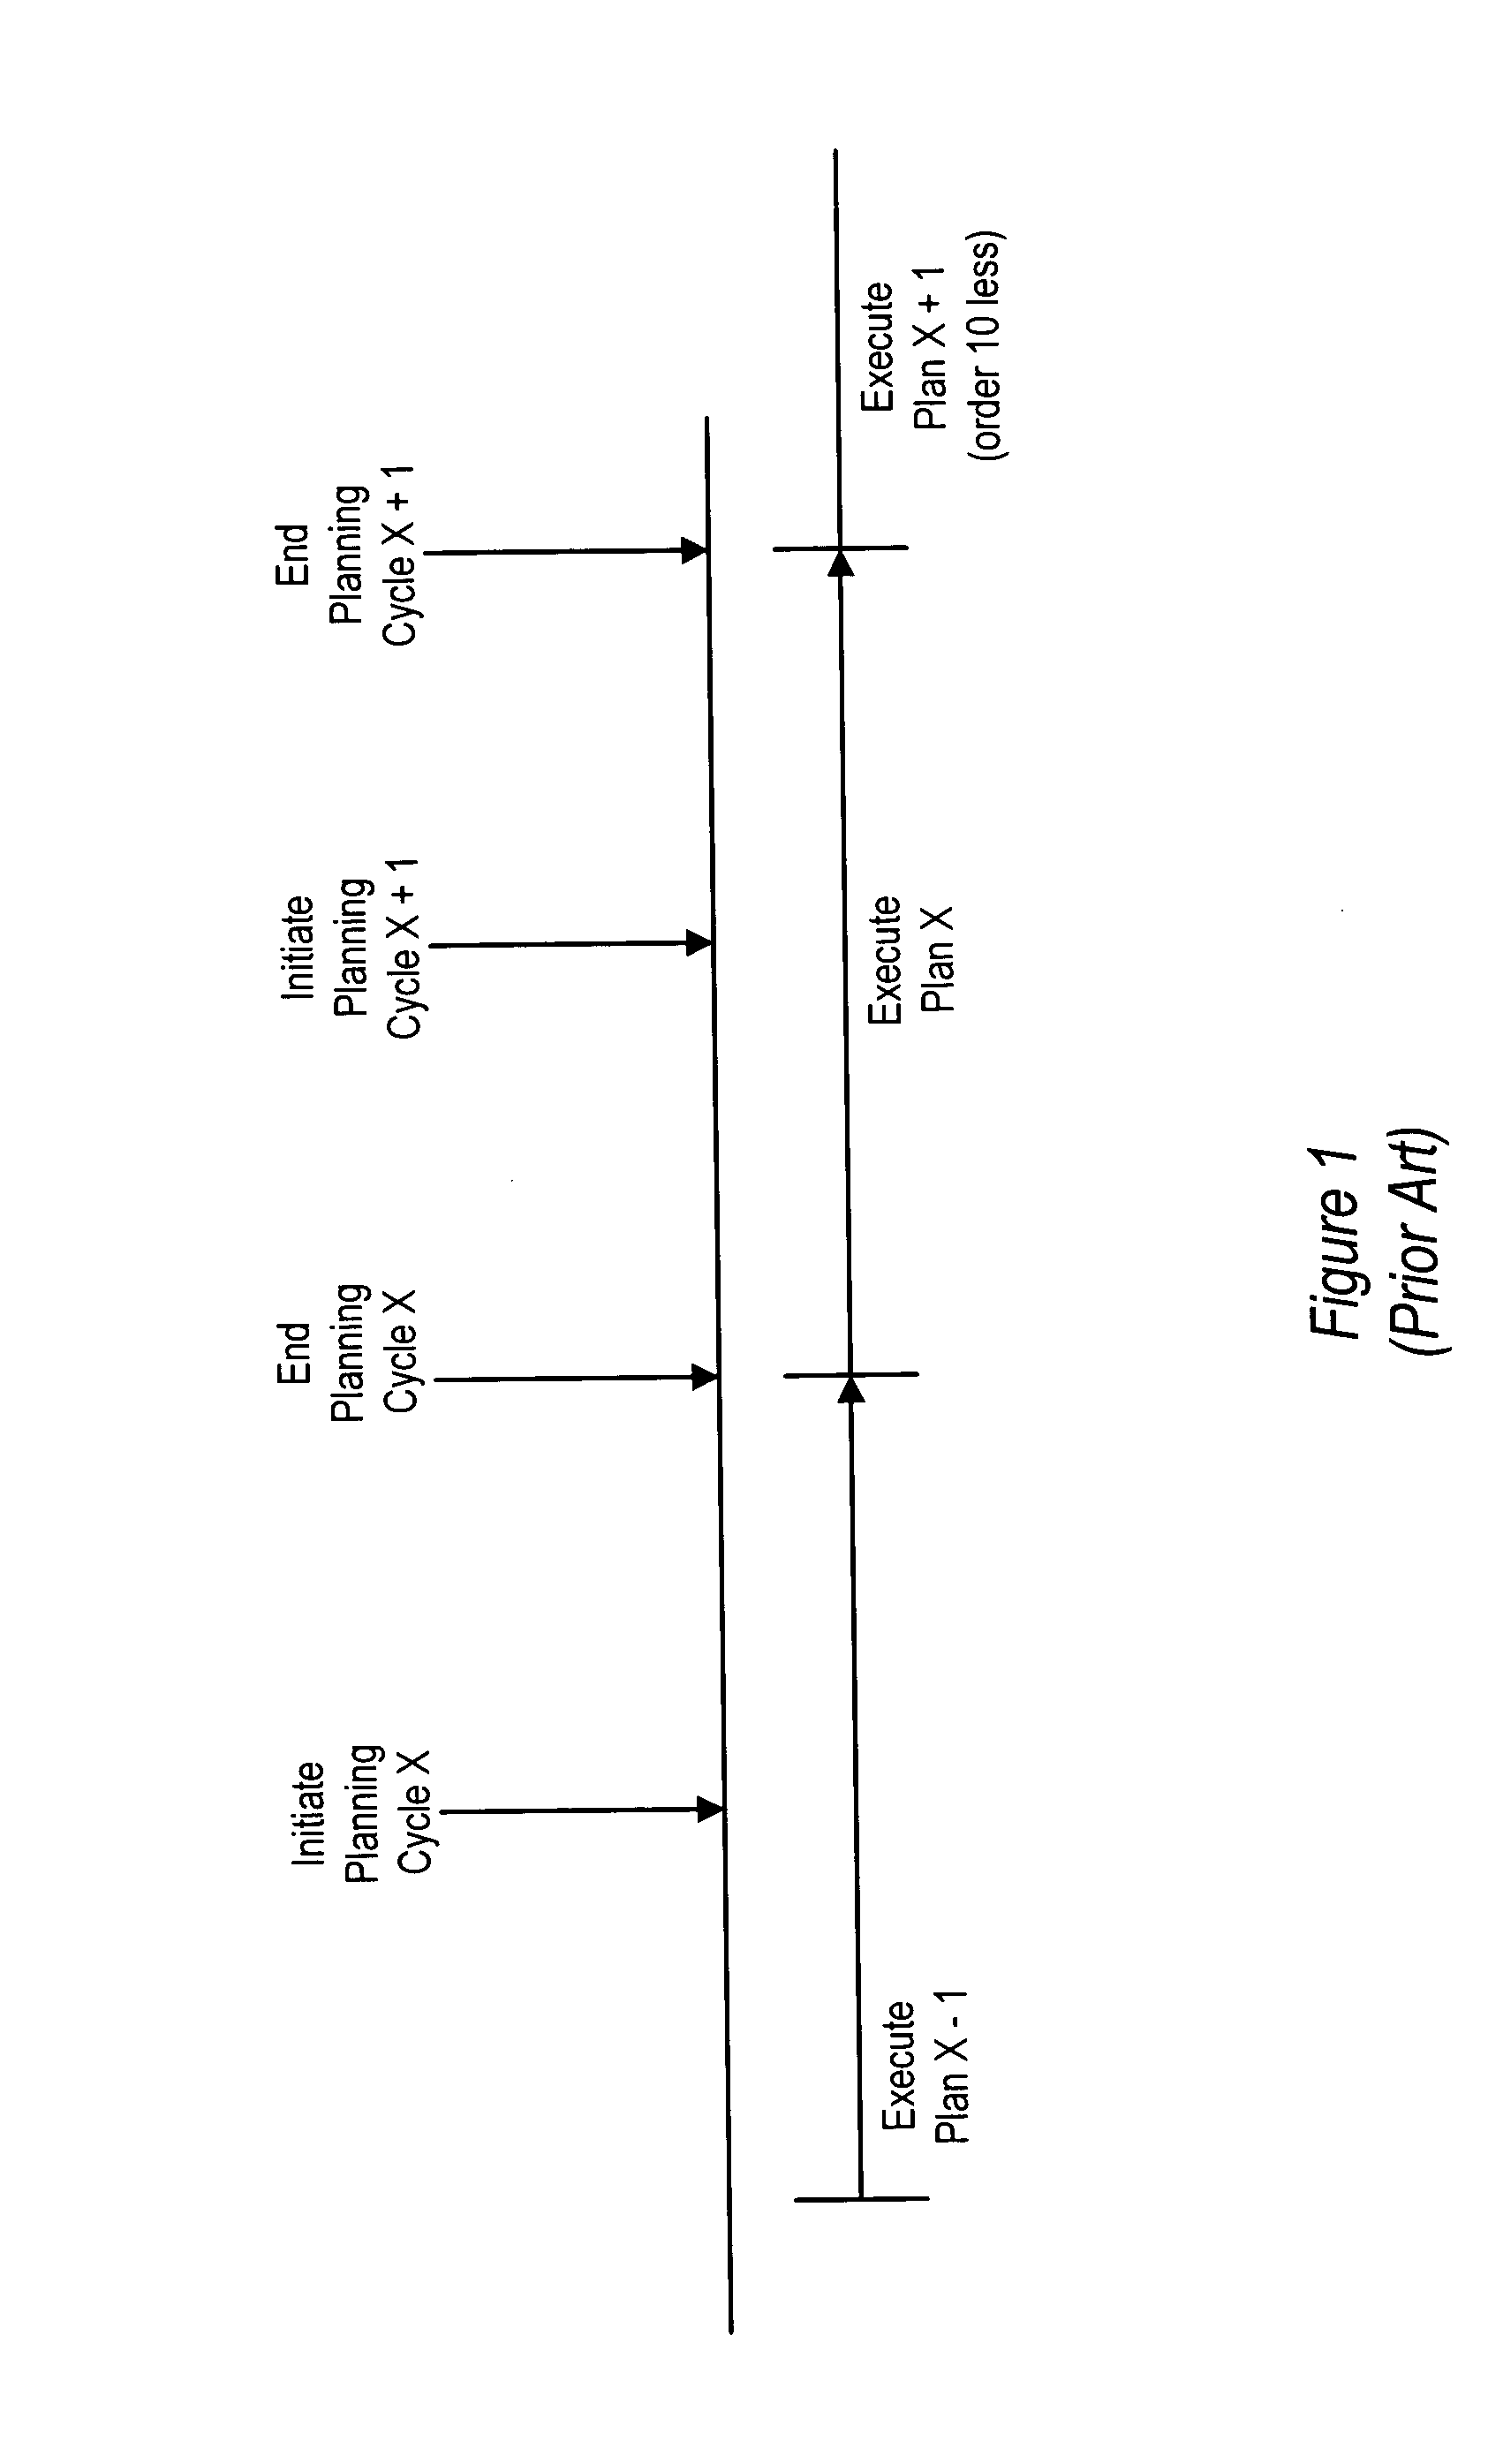 Dynamic logistics routing system